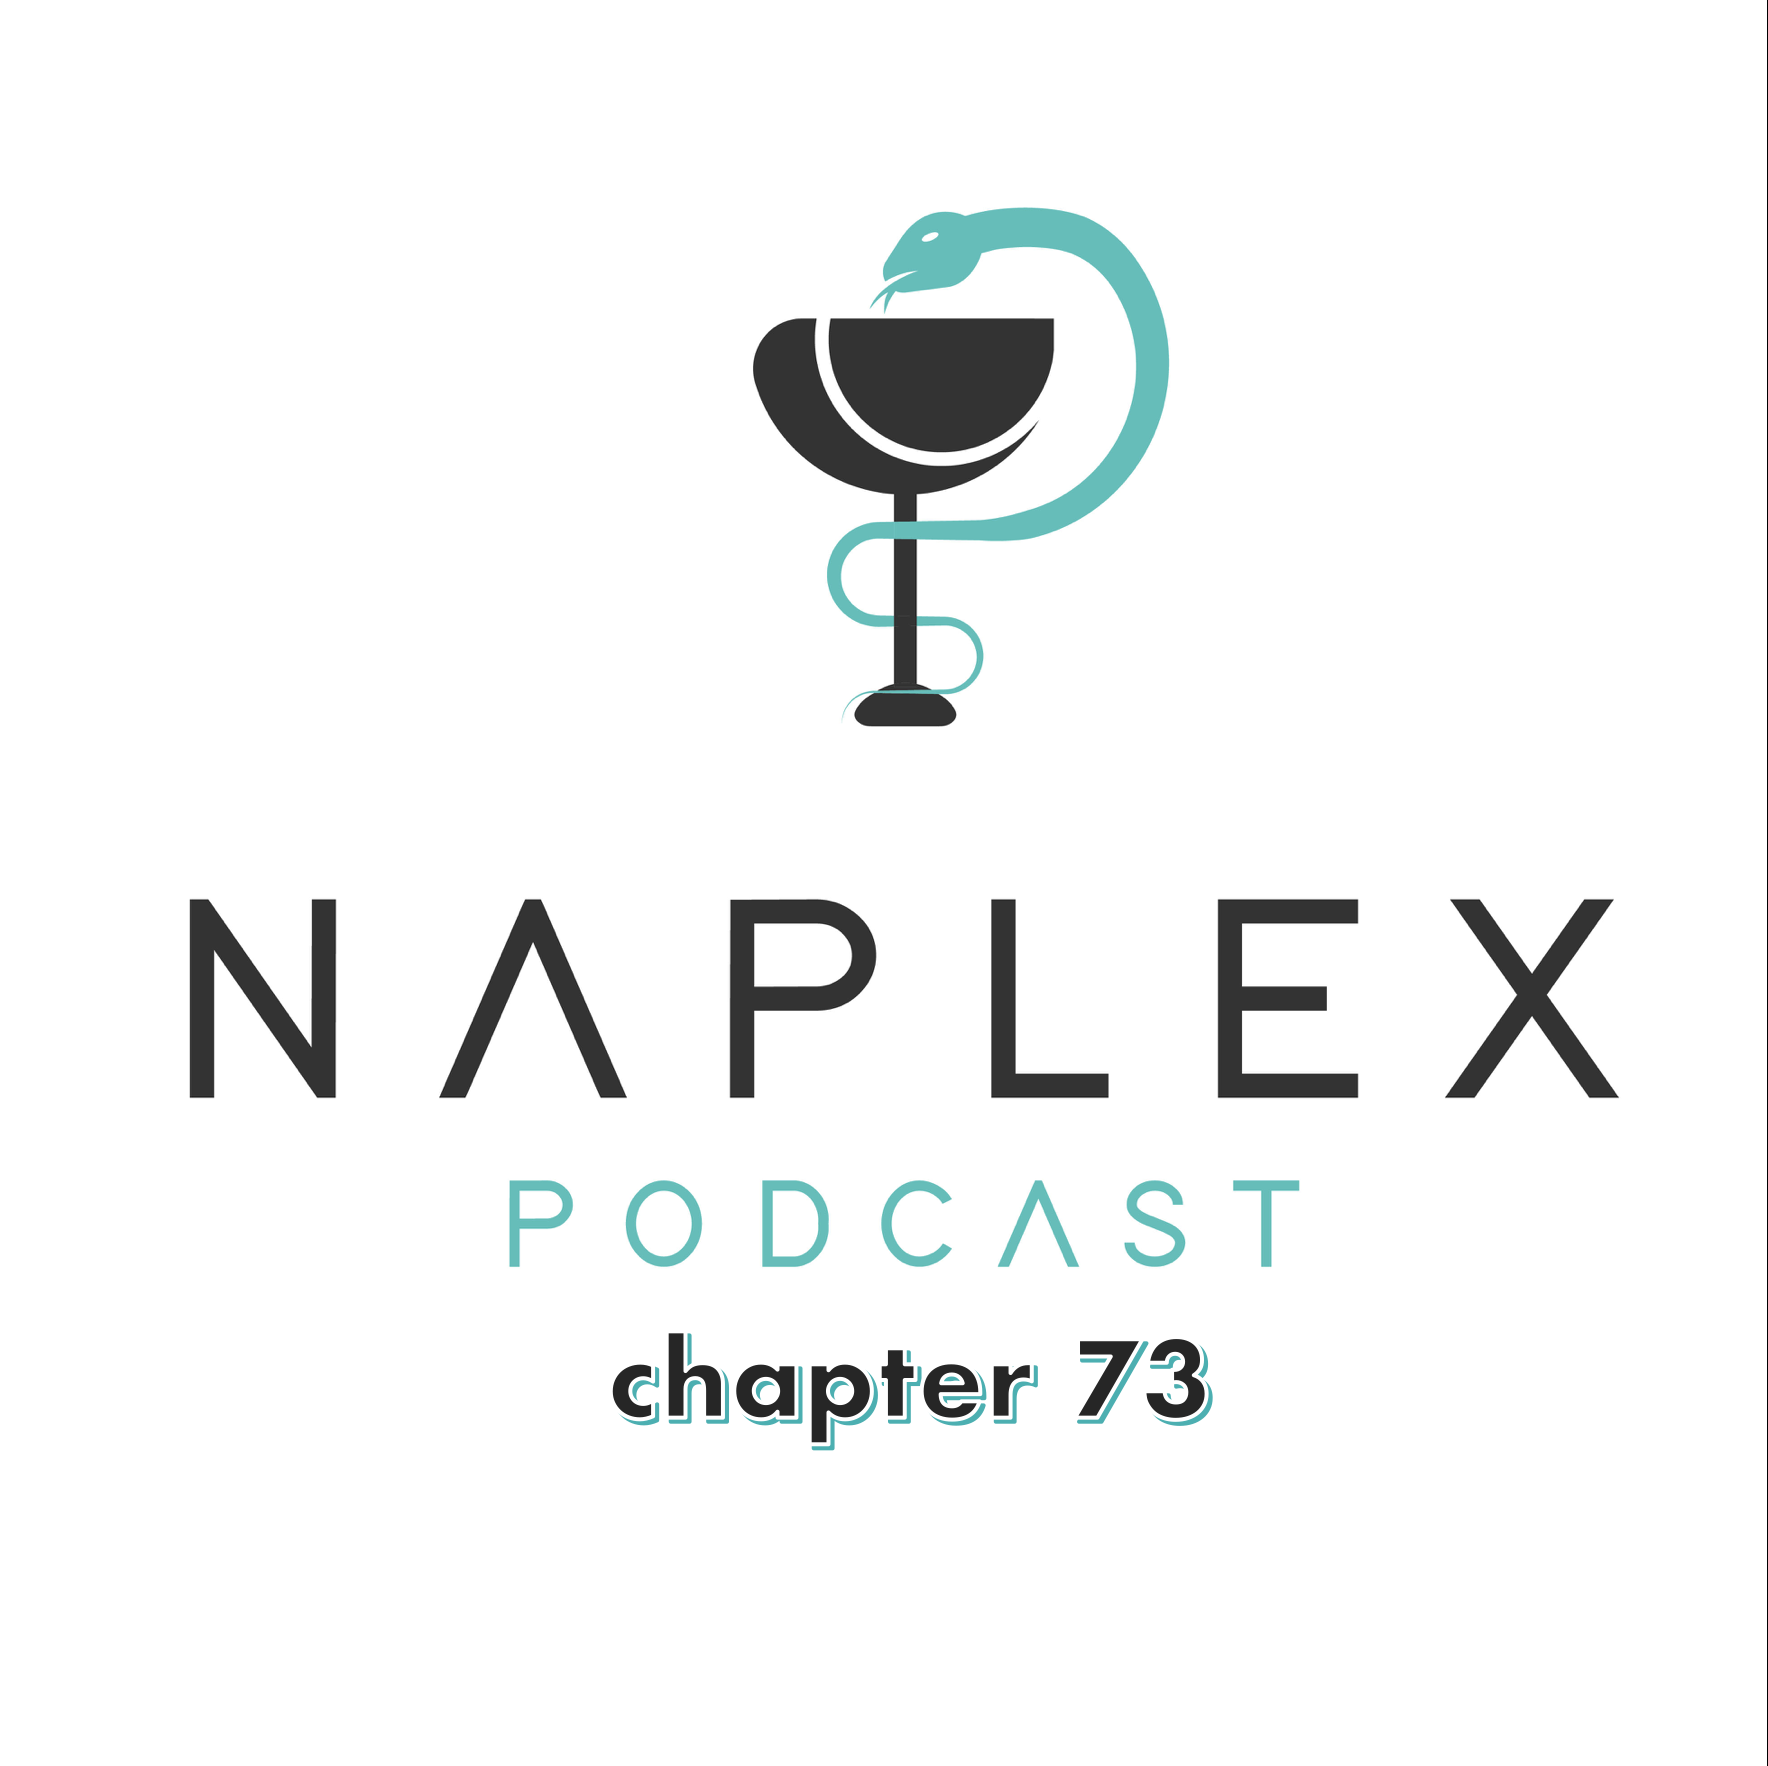 Naplex Podcast | Chapter 73: Infectious Disease Part 1 Review of Antibiotics by Drug Class